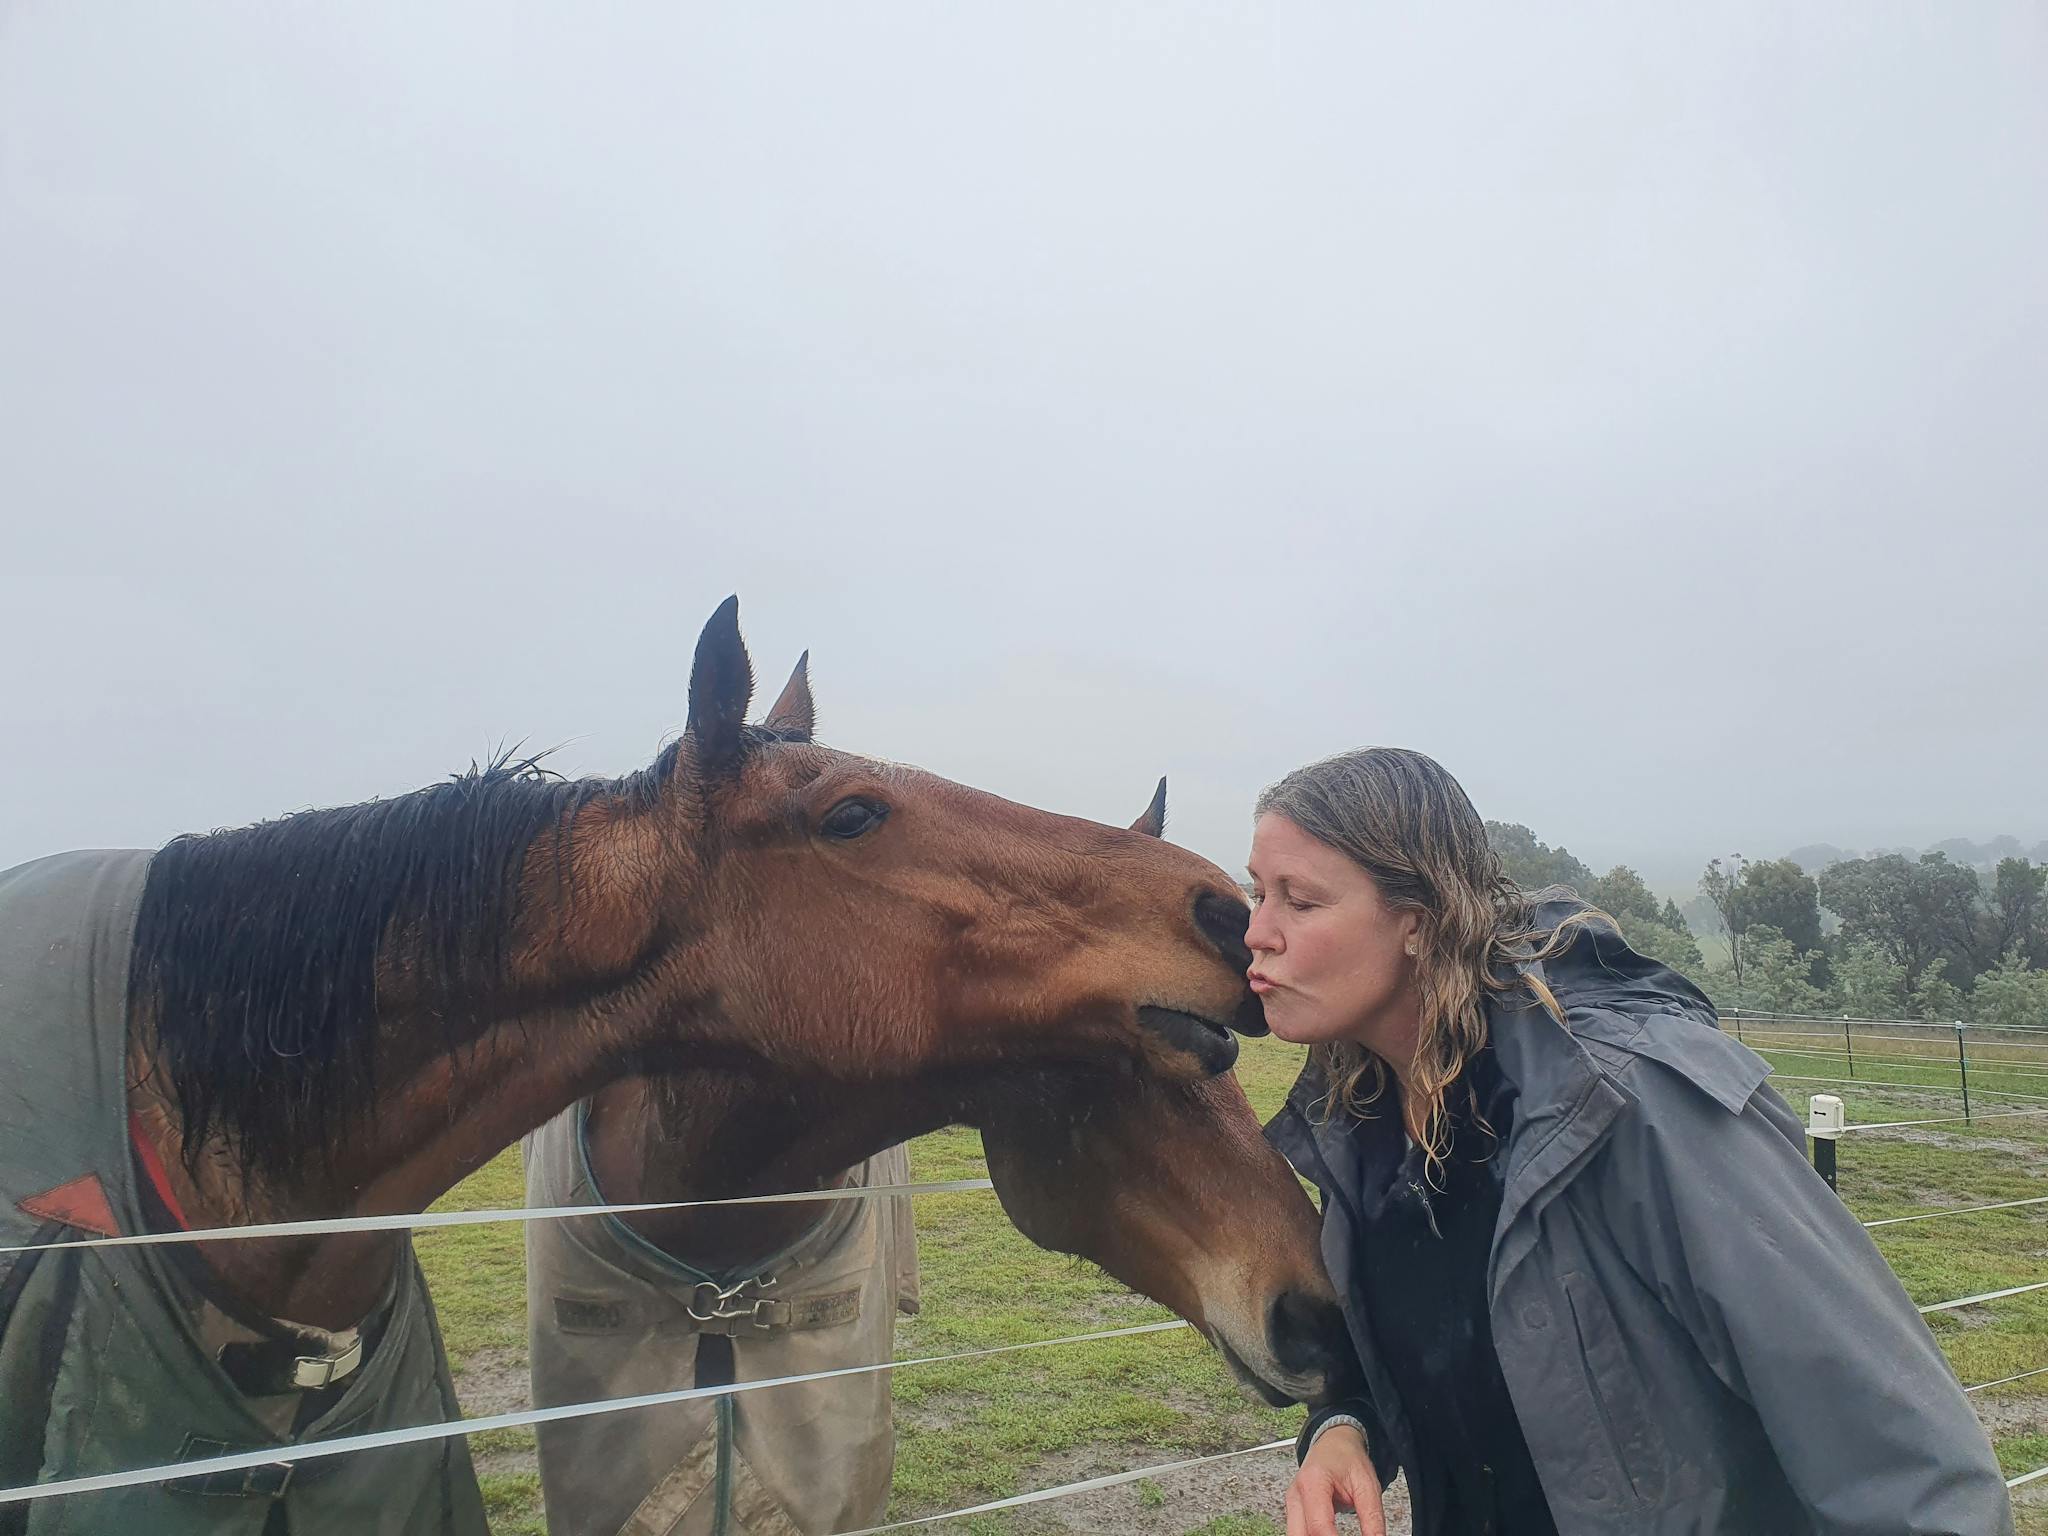 Brown horse with black mane gently kissing a woman's face